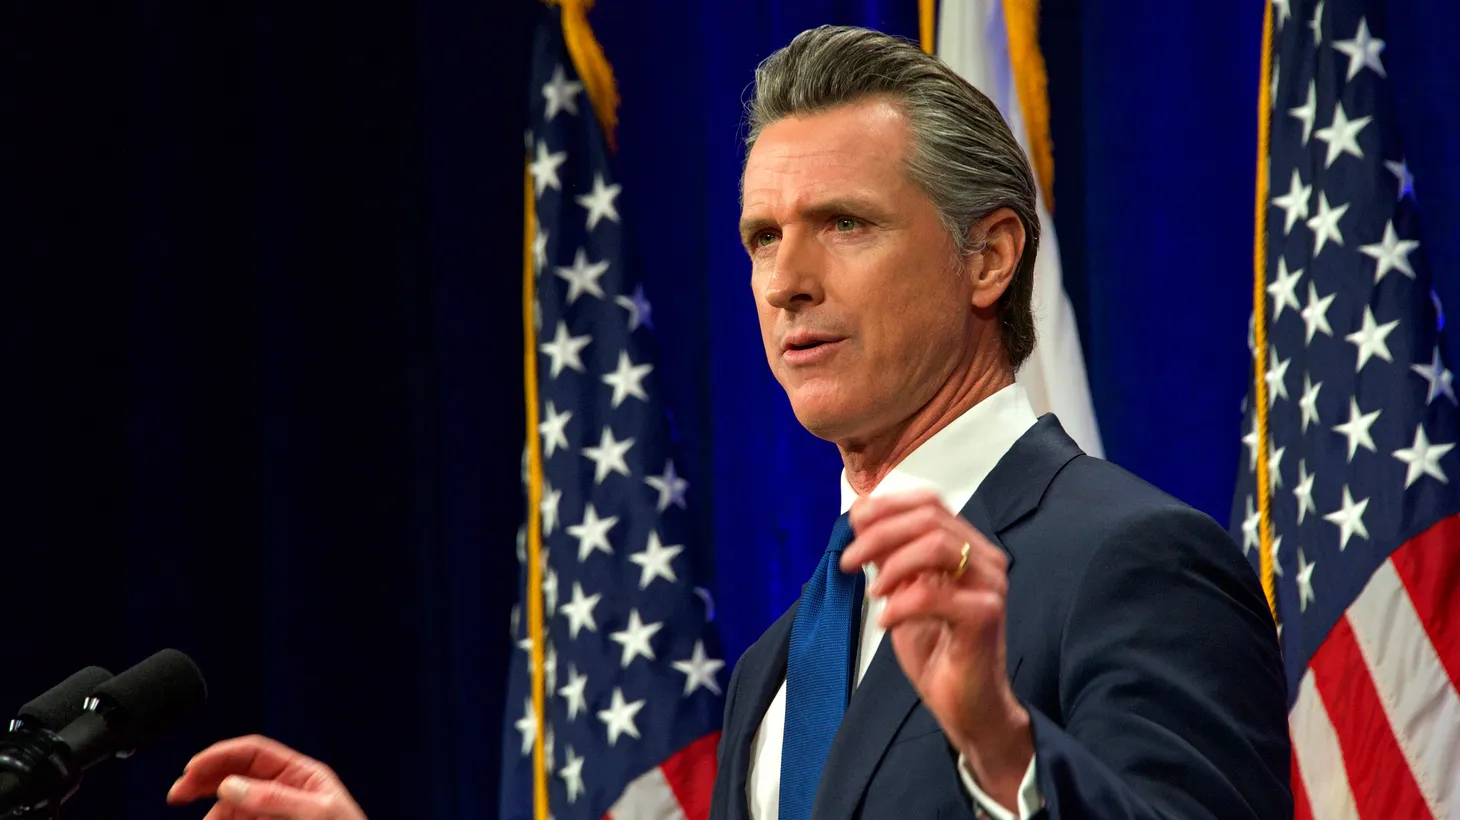 “The way he's been campaigning in recent weeks, [and] this Florida ad, it sounds more like a presidential candidate than a California gubernatorial candidate,” Politico reporter Lara Korte says of Gavin Newsom.